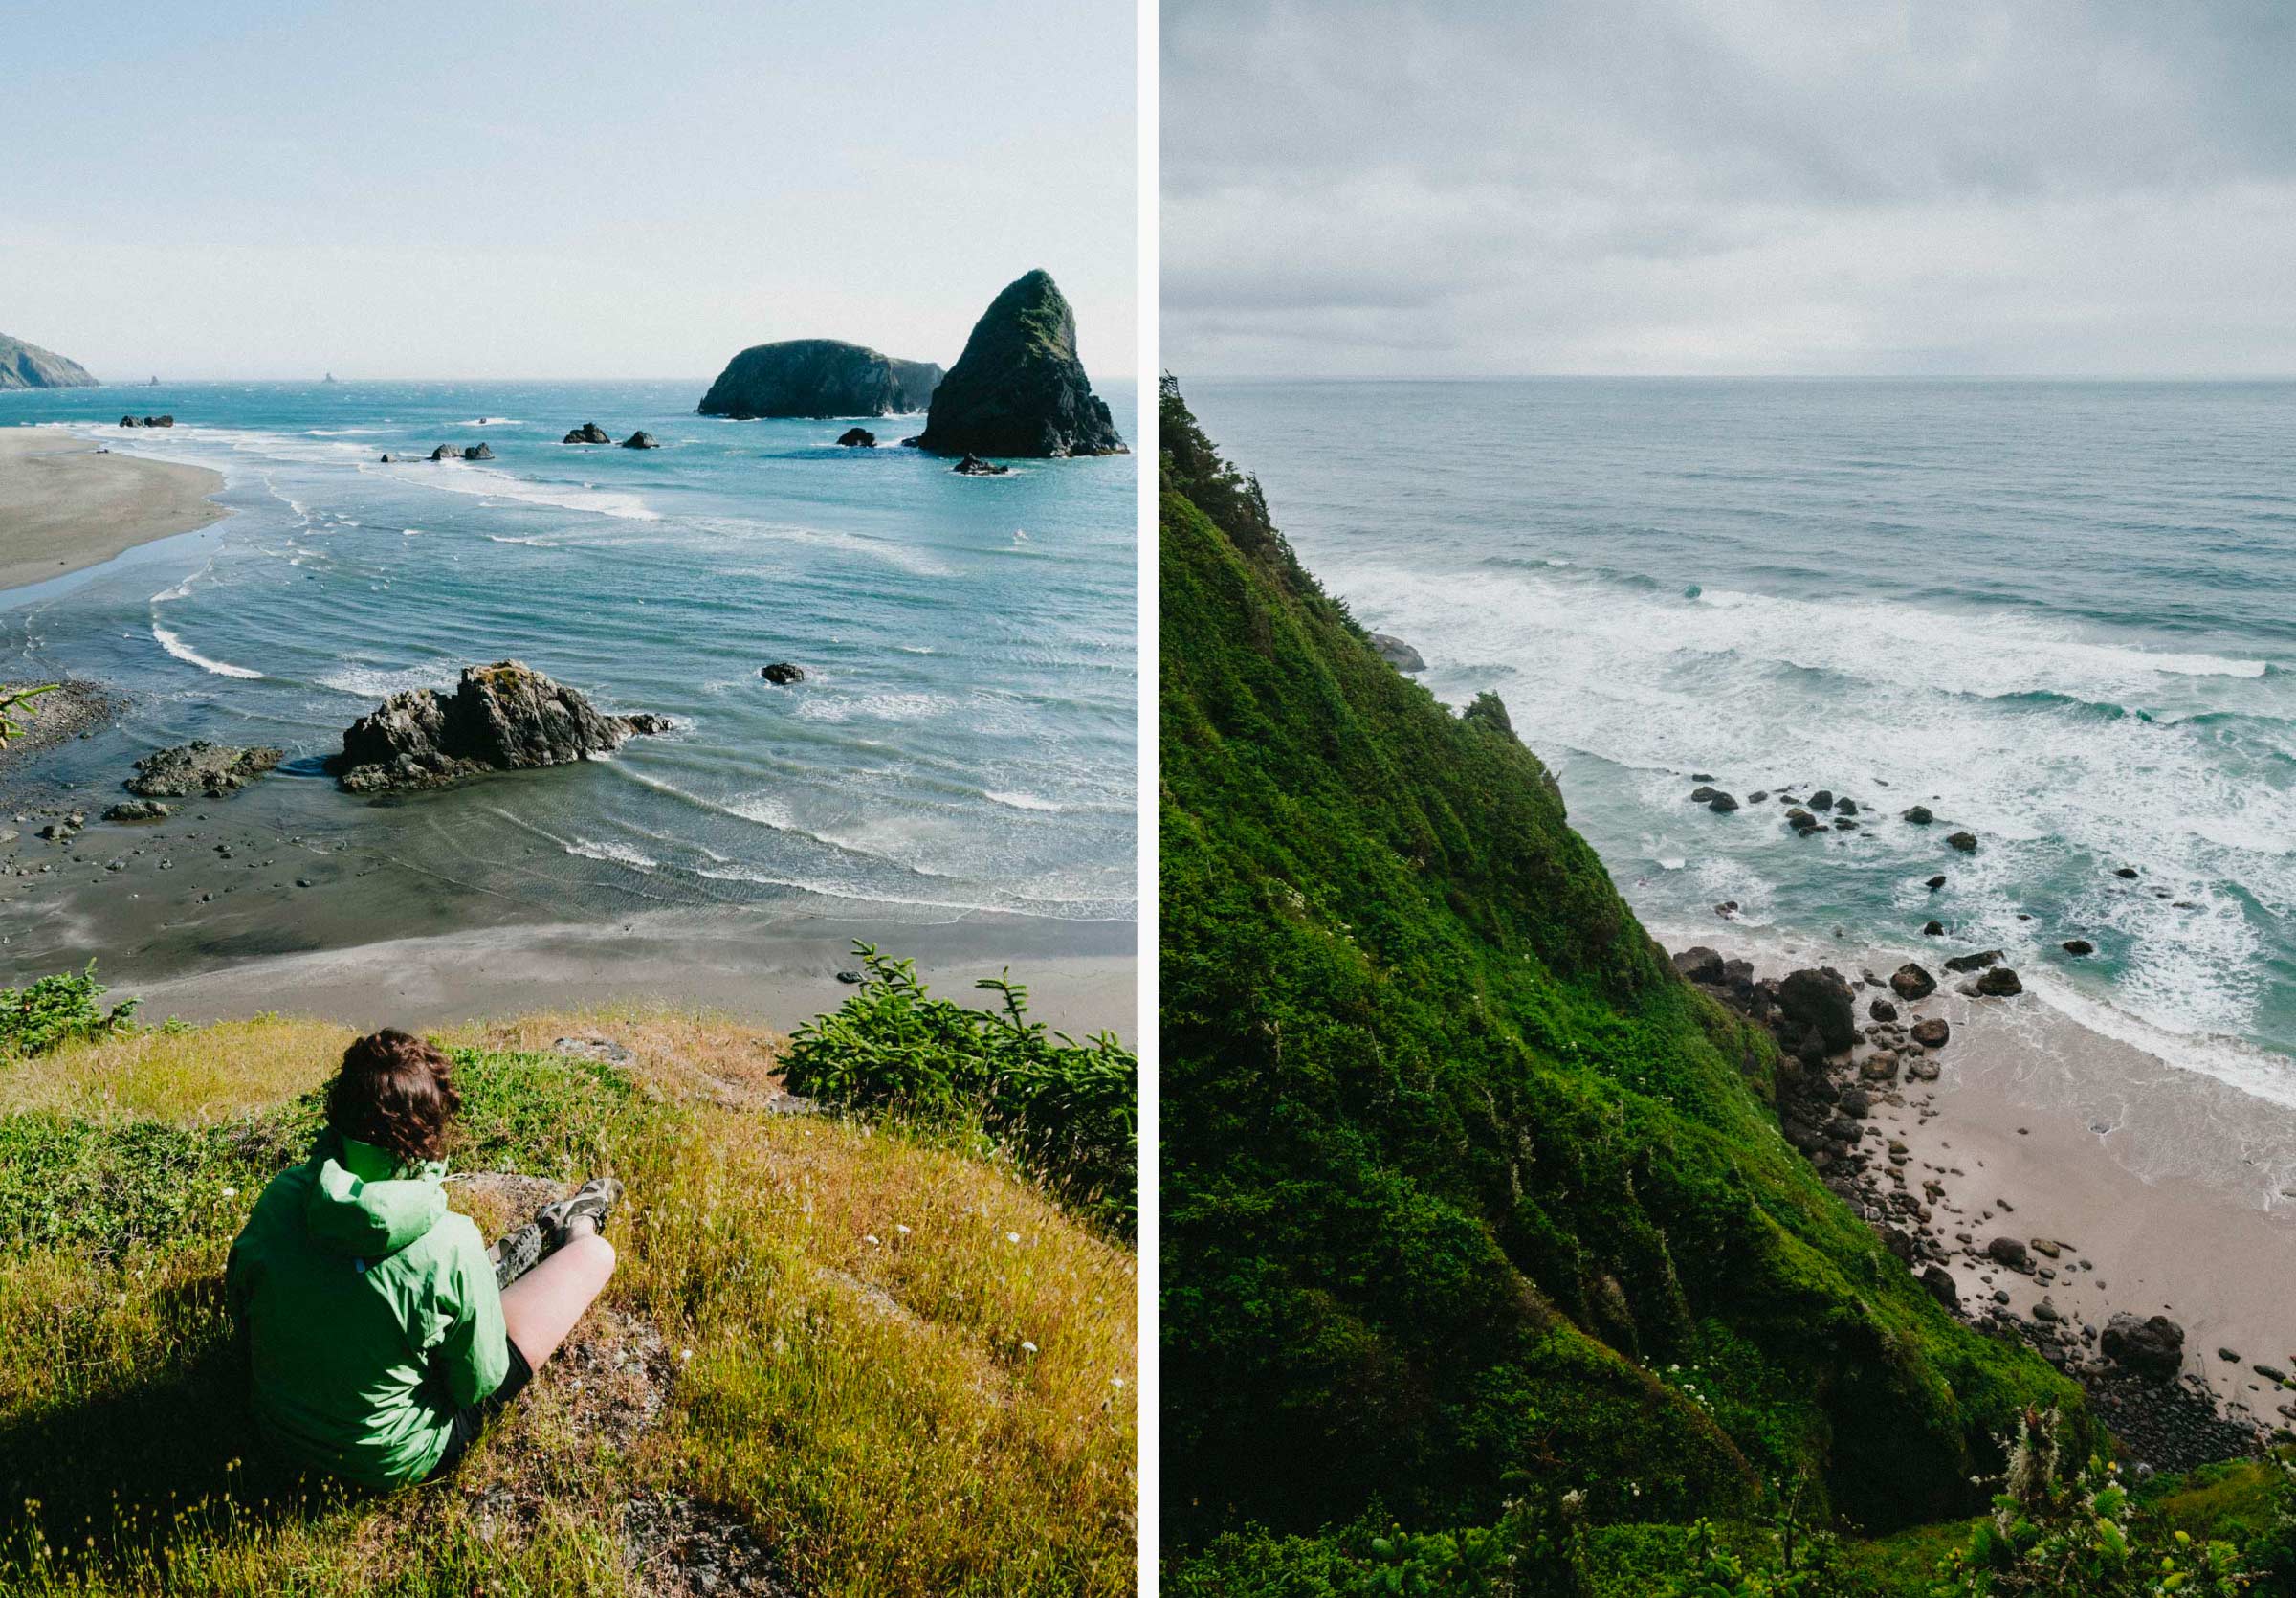 Looking out over Oregon's stunning and dramatic coastline